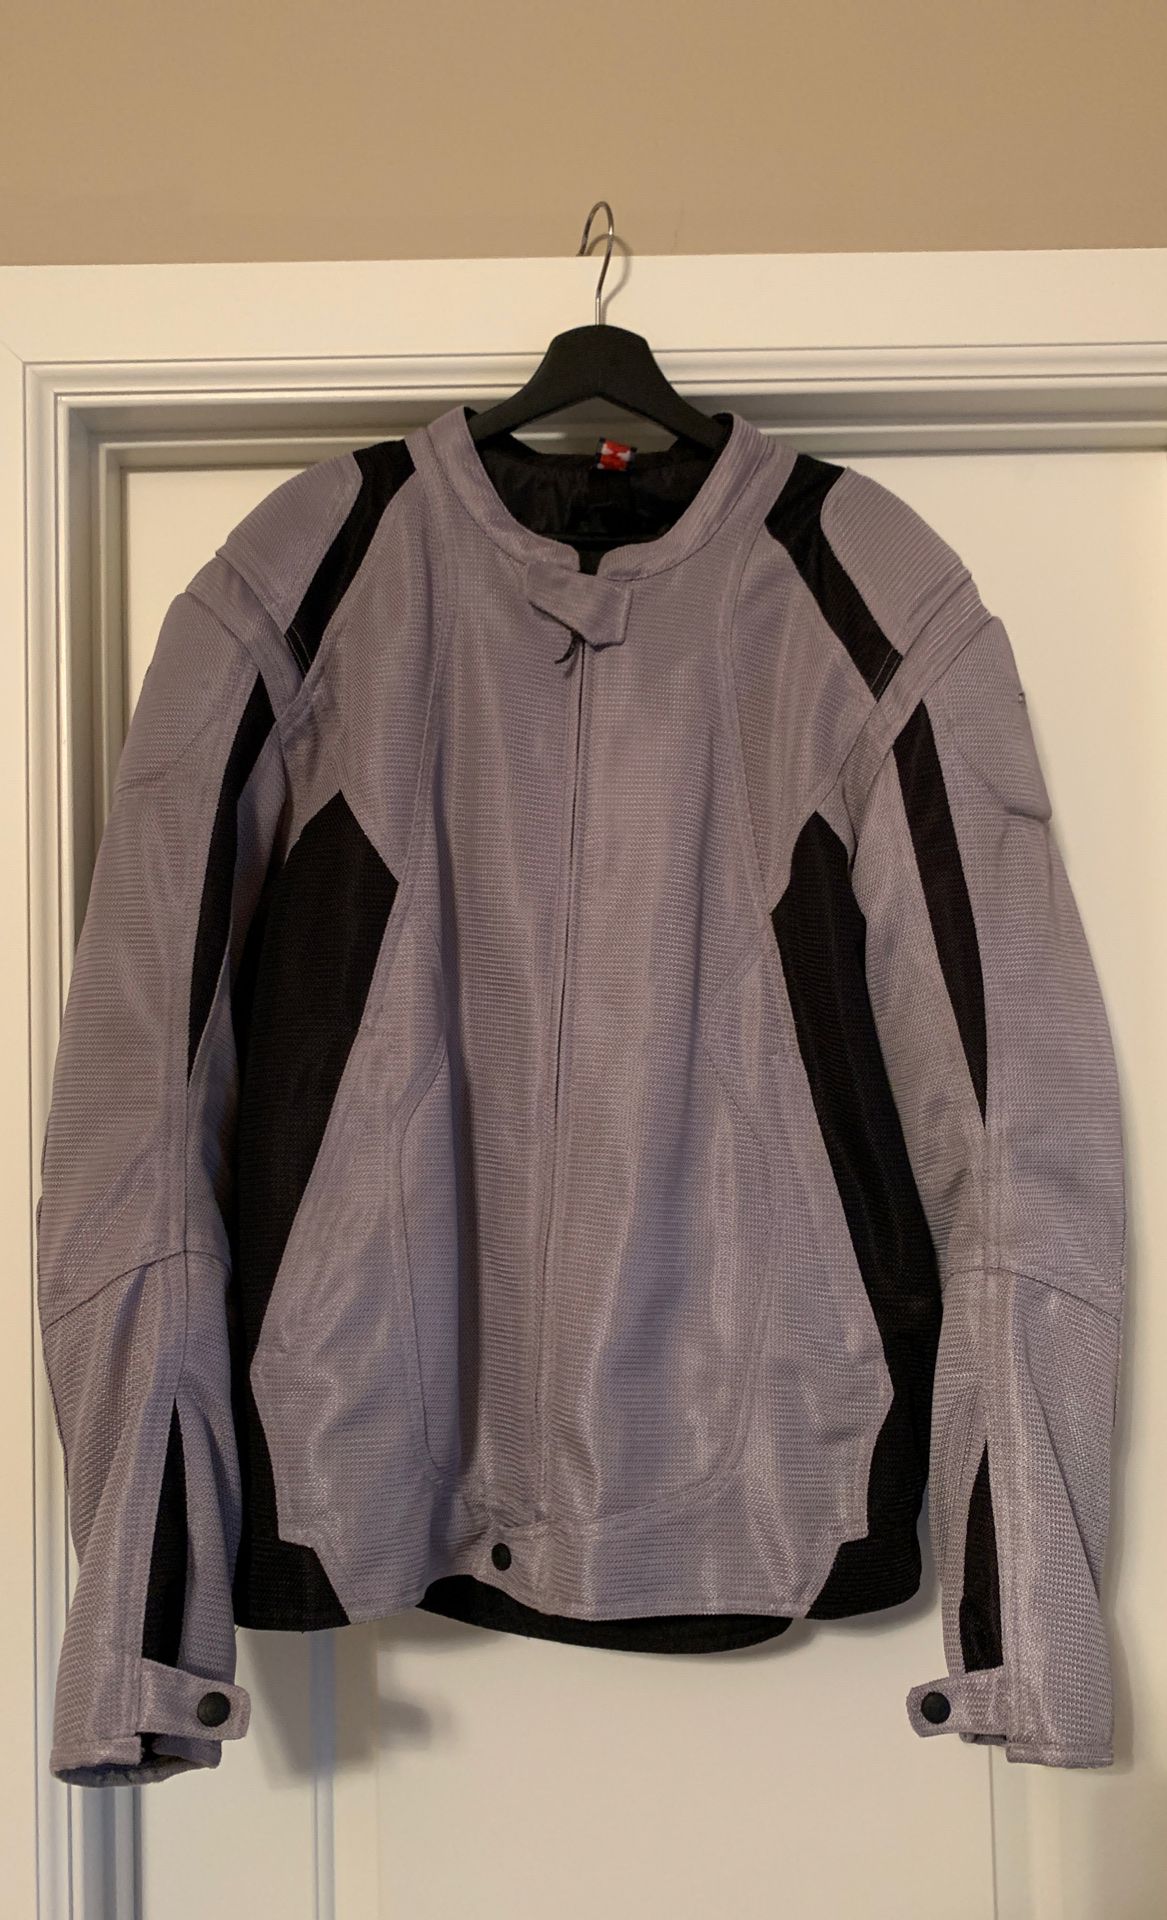 First Gear Motorcycle Jacket XLT Tall like New just Cleaned.